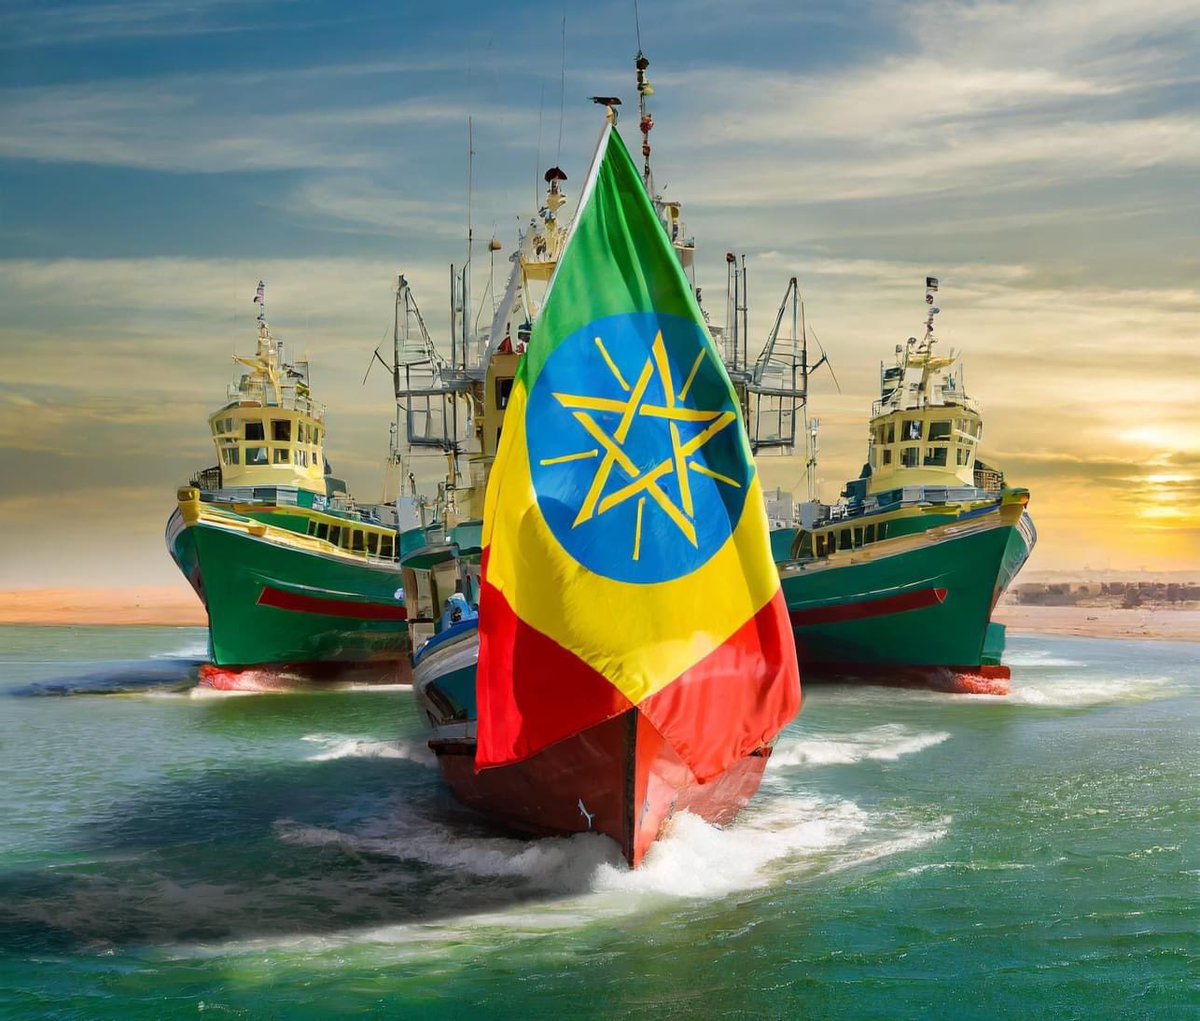 The int. community should know the importance of port land for 128 million people lies in its role as a conduit for survival, enabling the transportation of essentials for communities across the board. #Ethiopia_prevails #HandsOffEthiopia #Abiy_Ahmed